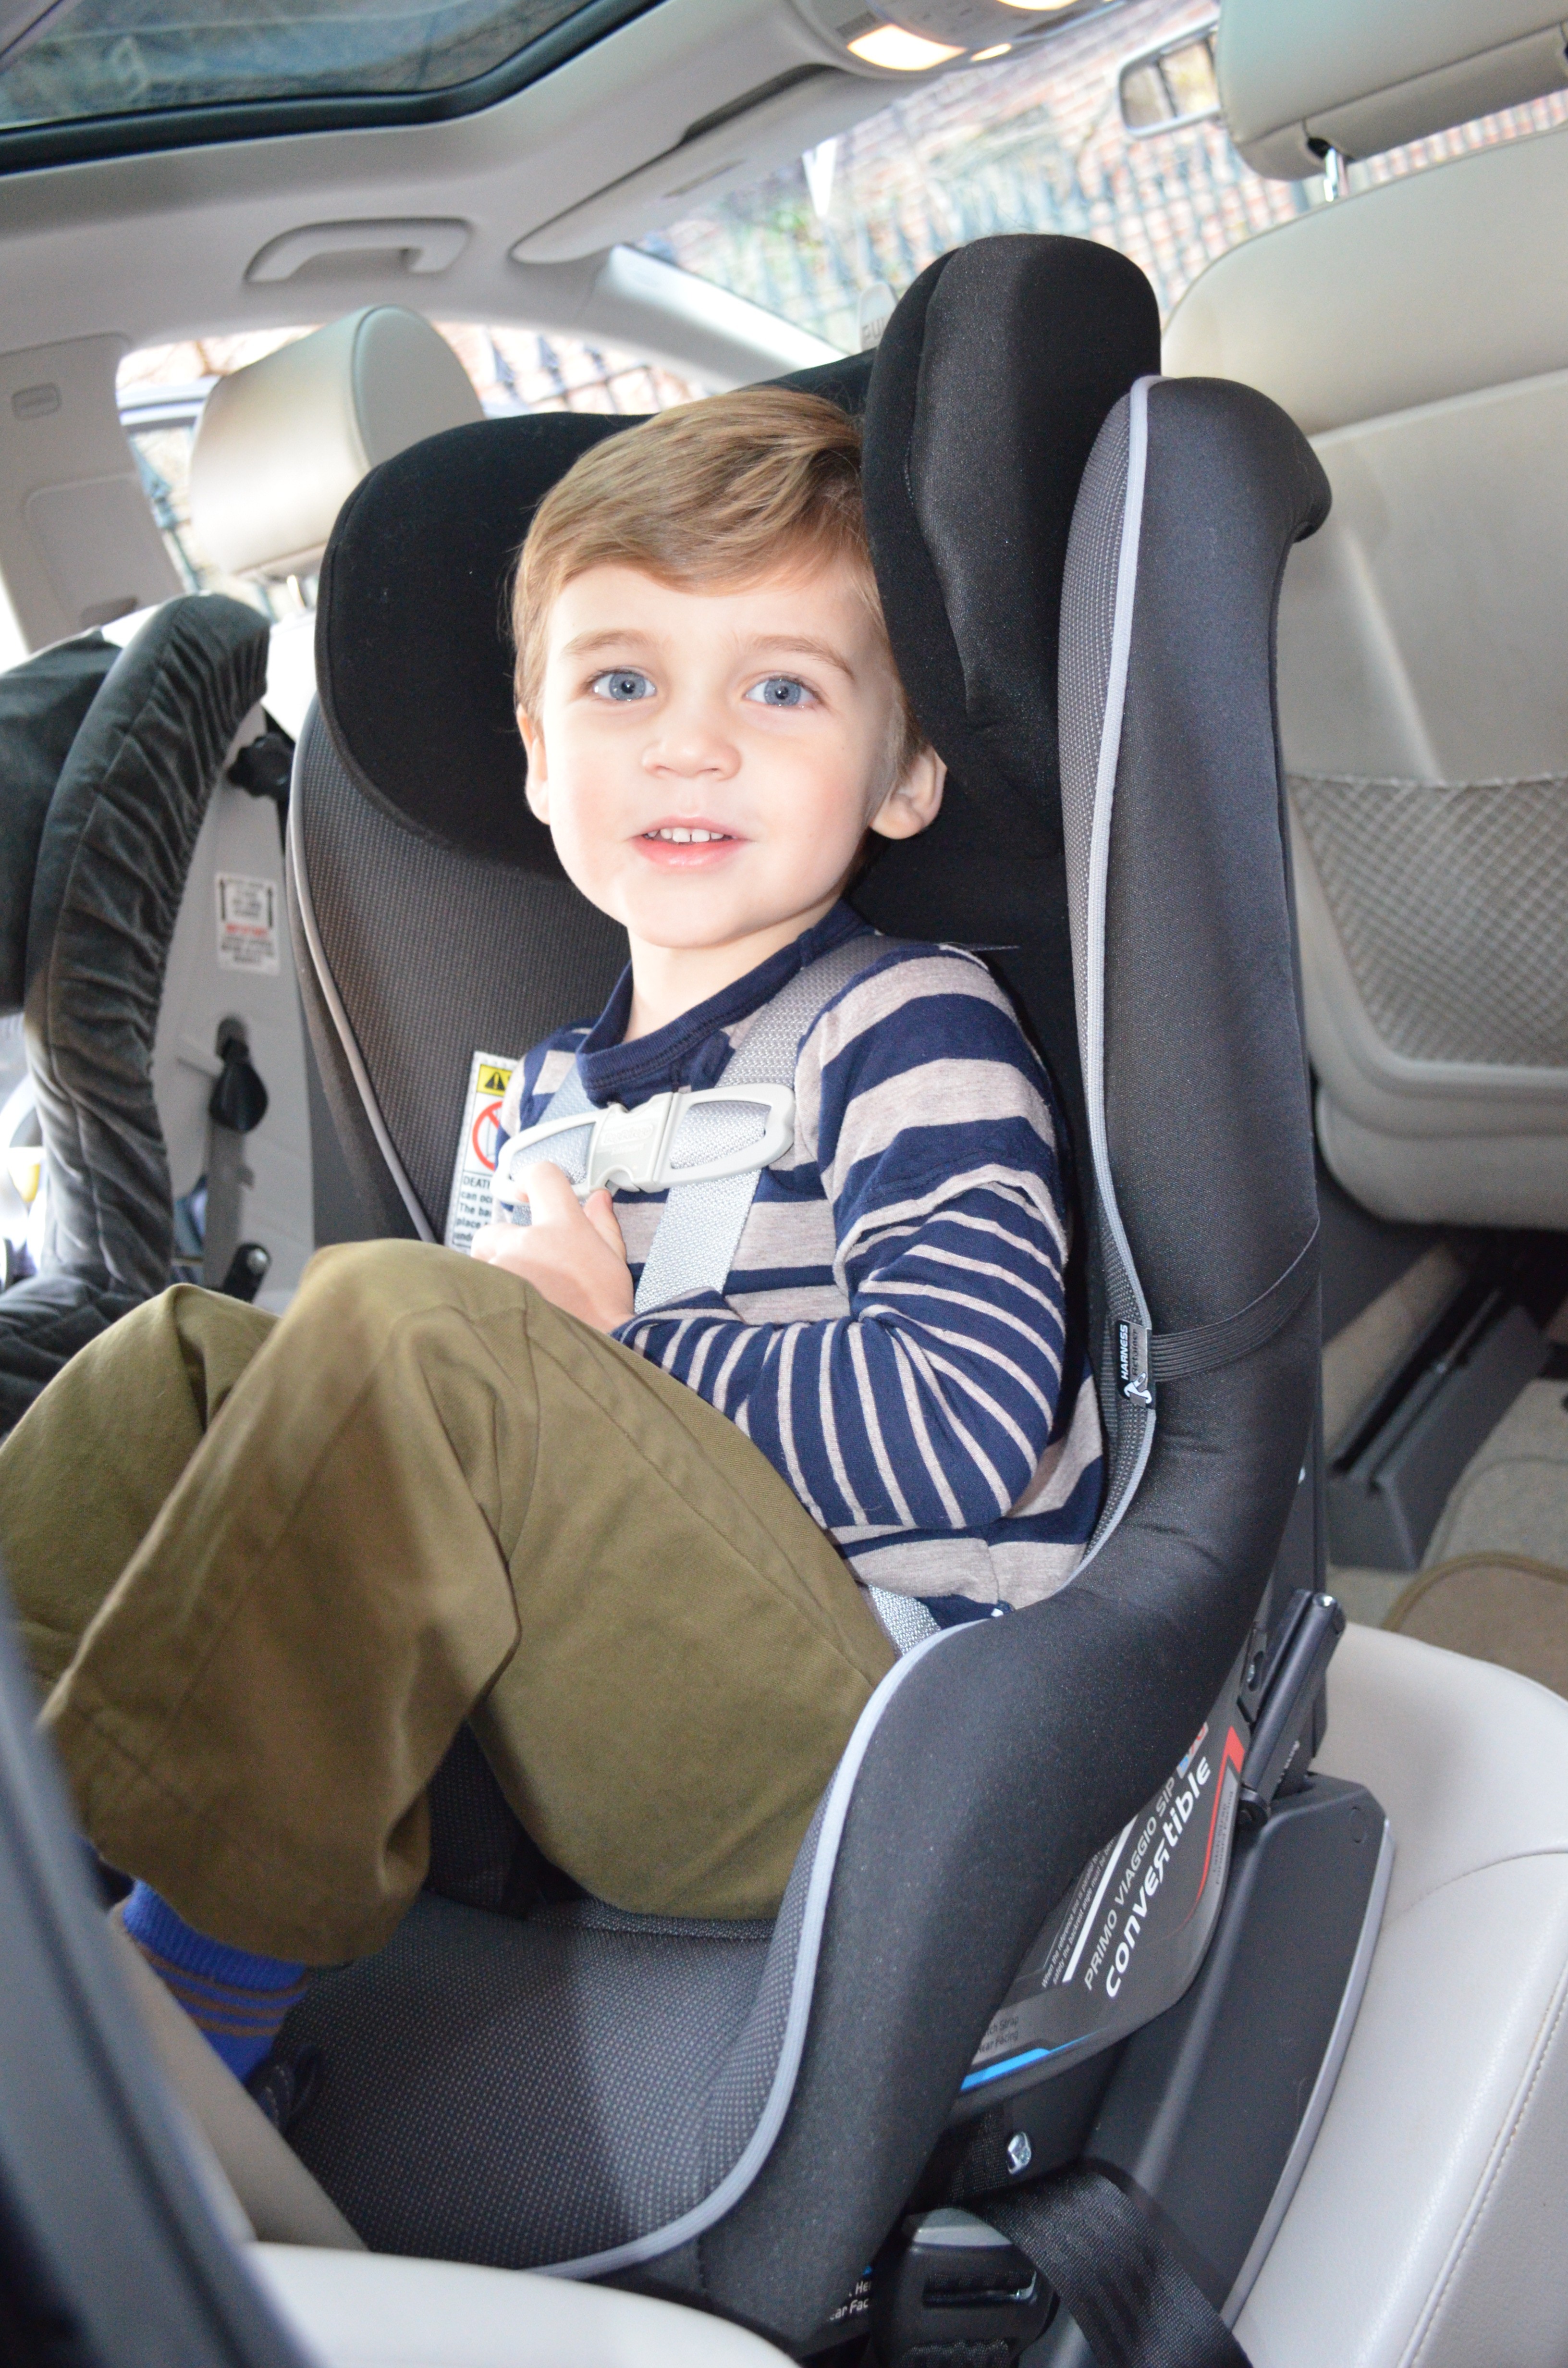 Your Child Turn Forward Facing, When Should You Switch Car Seat To Forward Facing